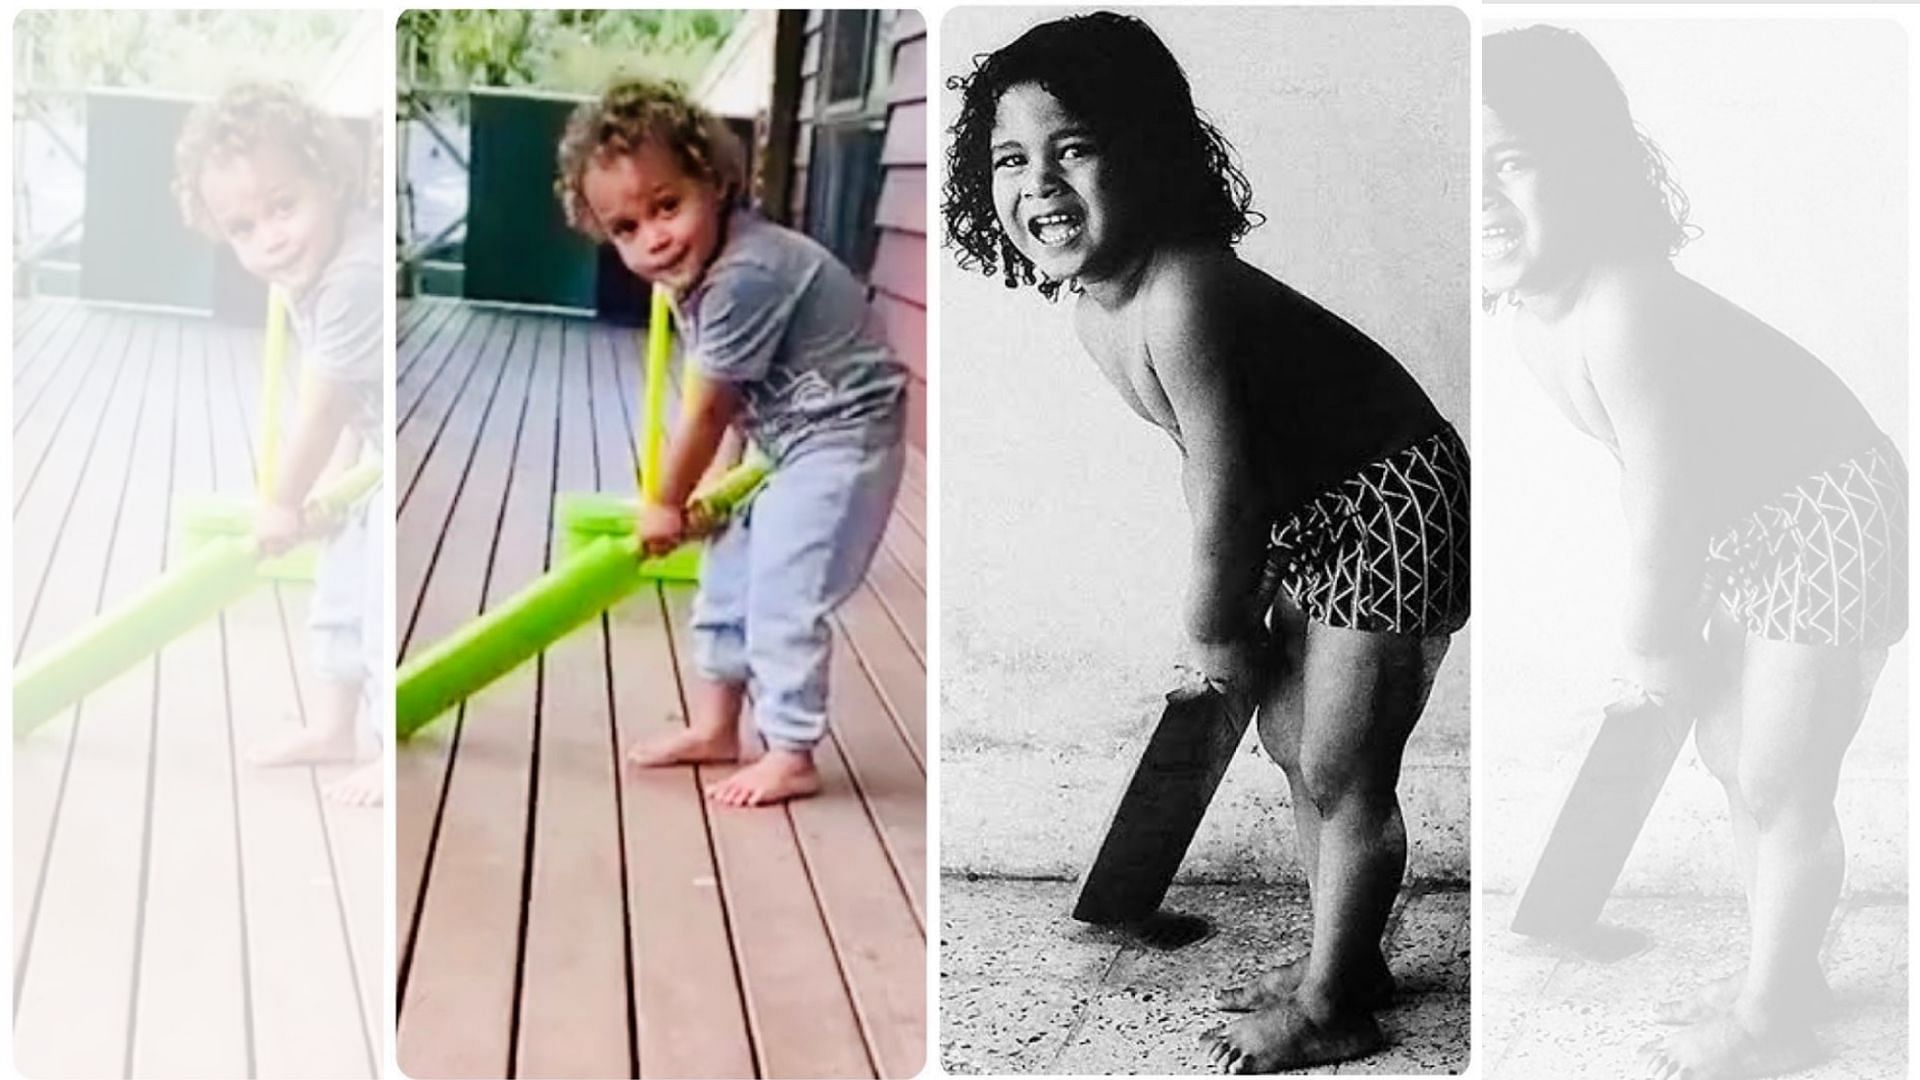 Sachin Tendulkar posted a picture of himself from his younger days and a photo of Brian Lara’s son.